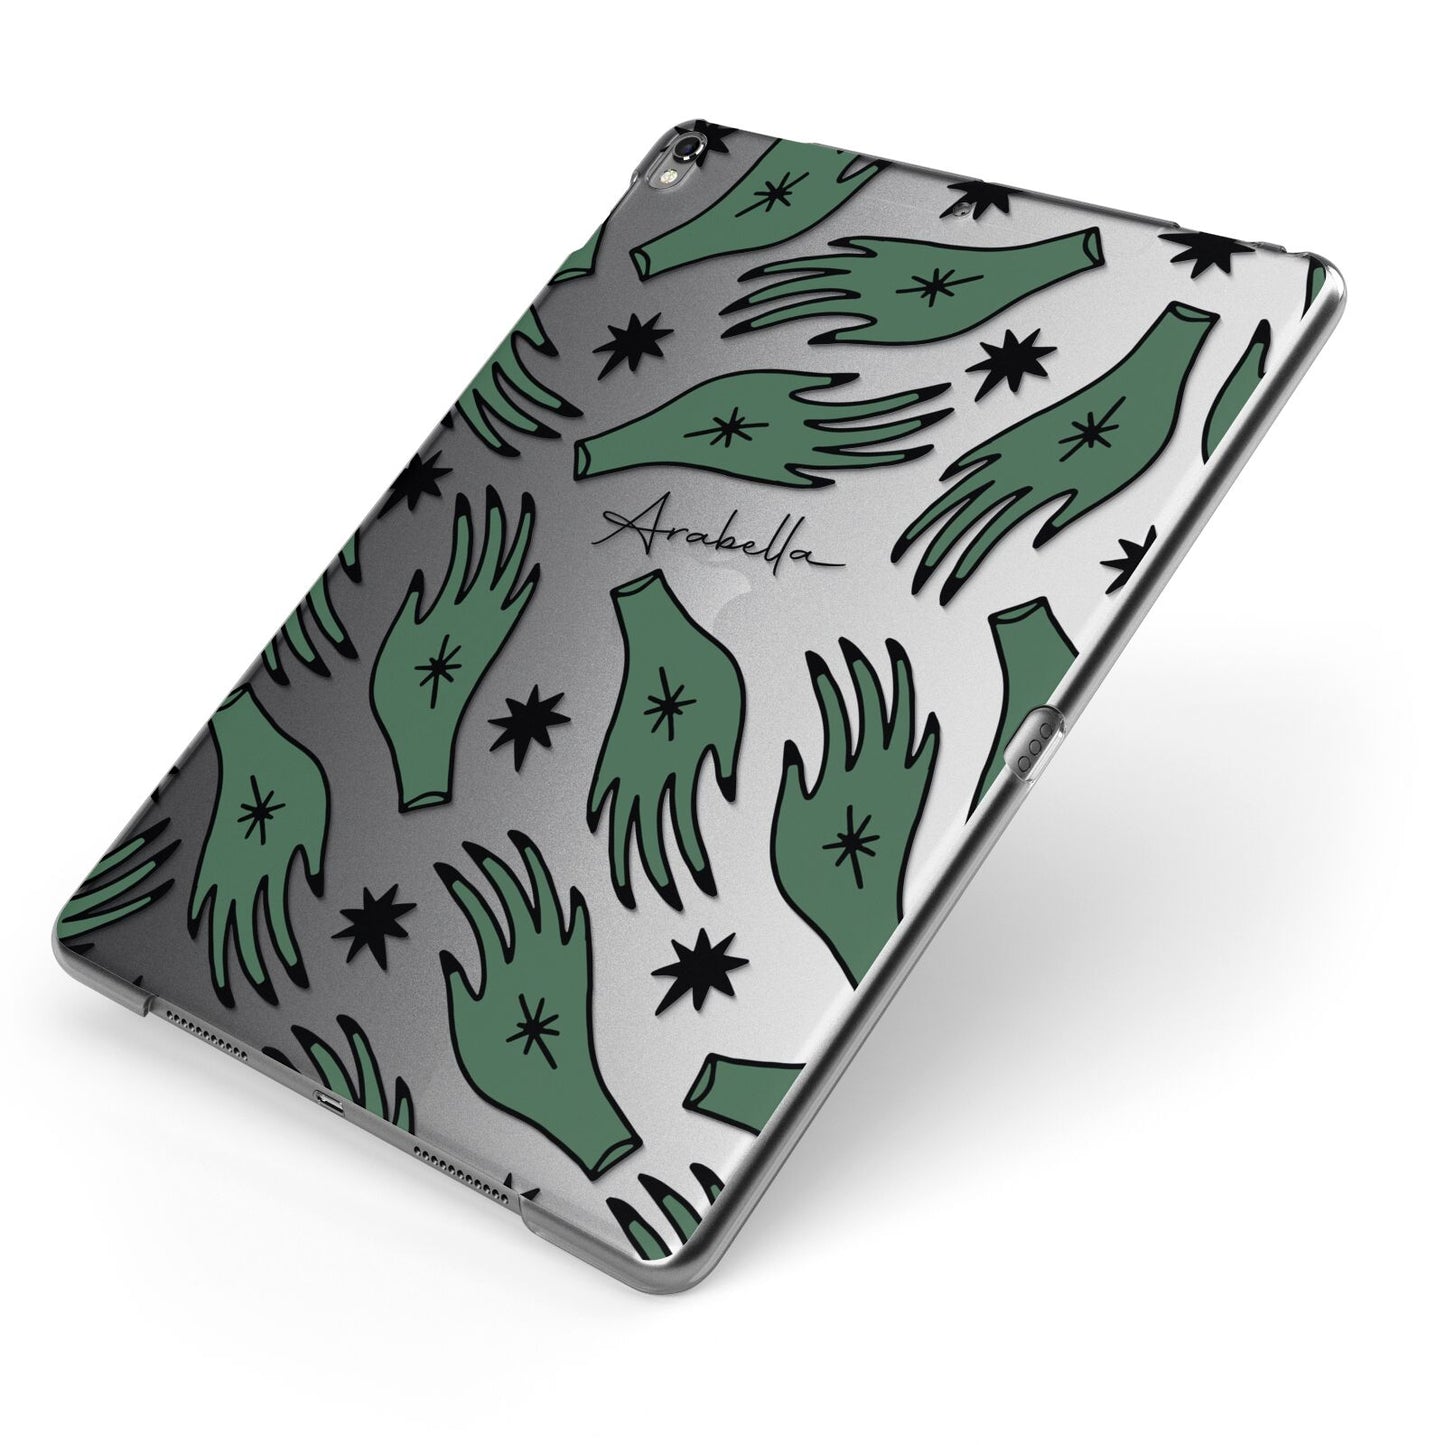 Green Star Hands Personalised Apple iPad Case on Grey iPad Side View